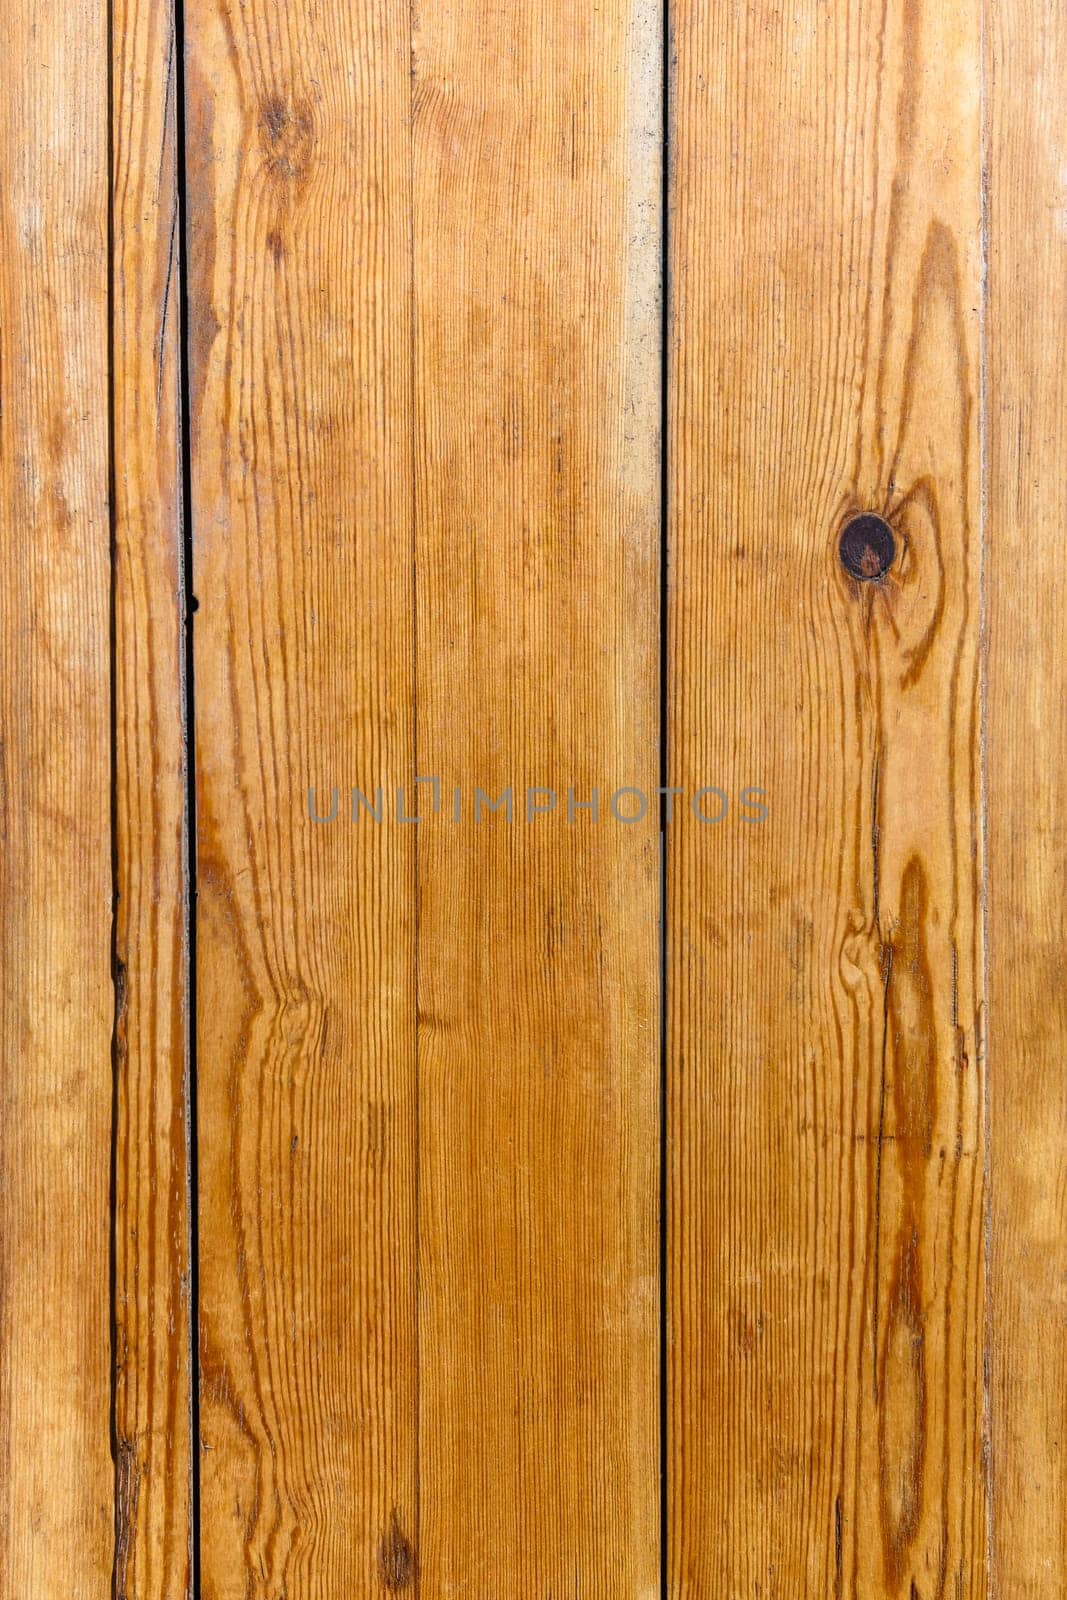 Natural wooden planks in a rustic style 3